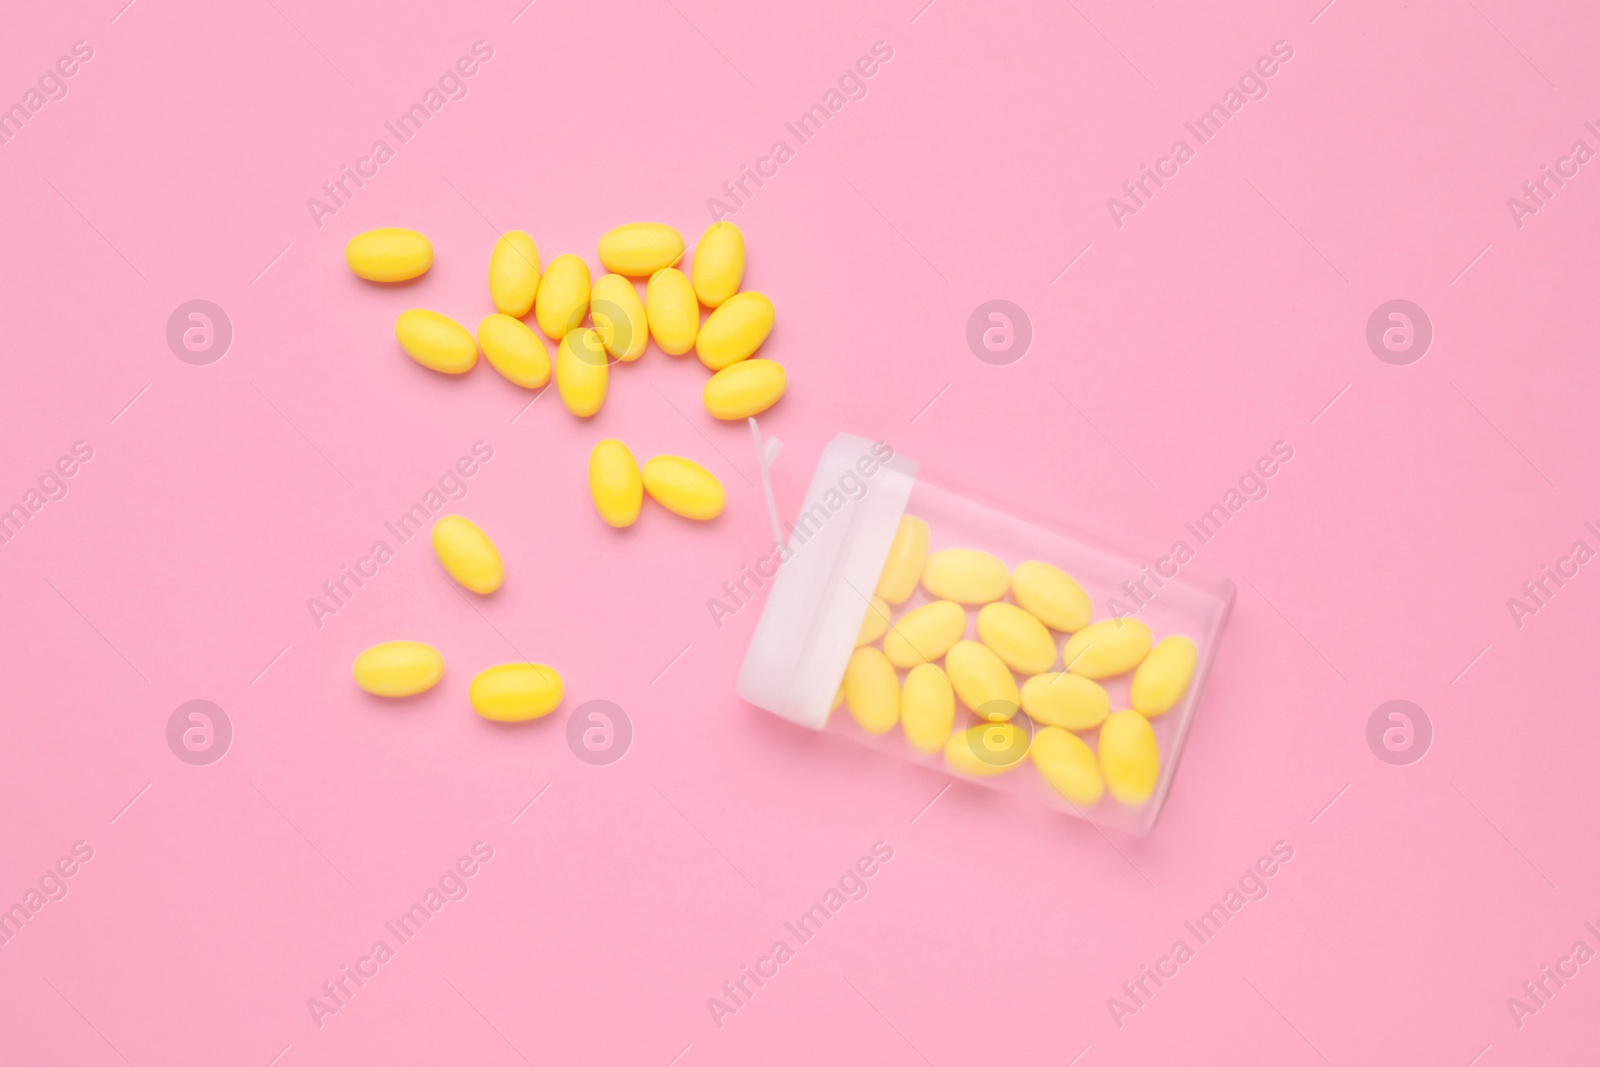 Photo of Yellow dragee candies and container on pink background, flat lay